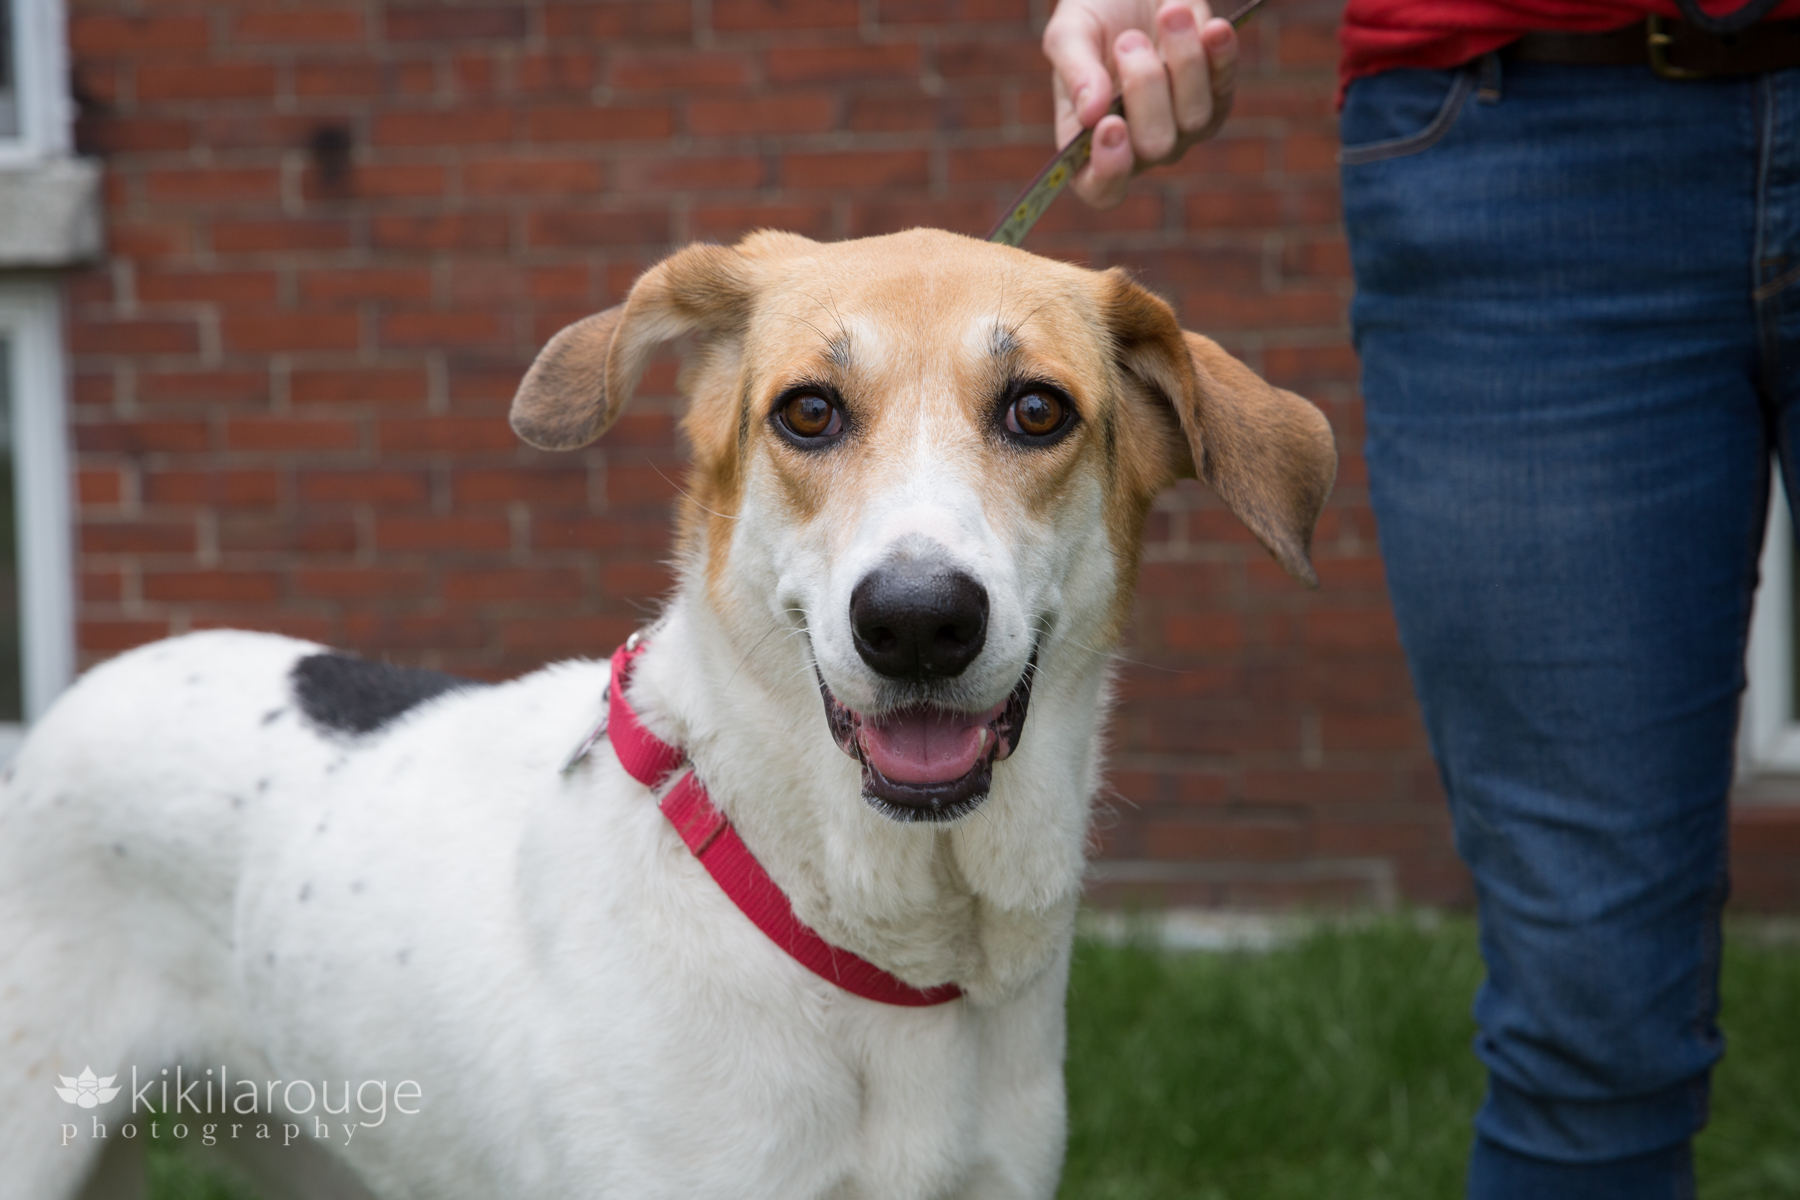 White and beige coonhound rescue mix with red collar